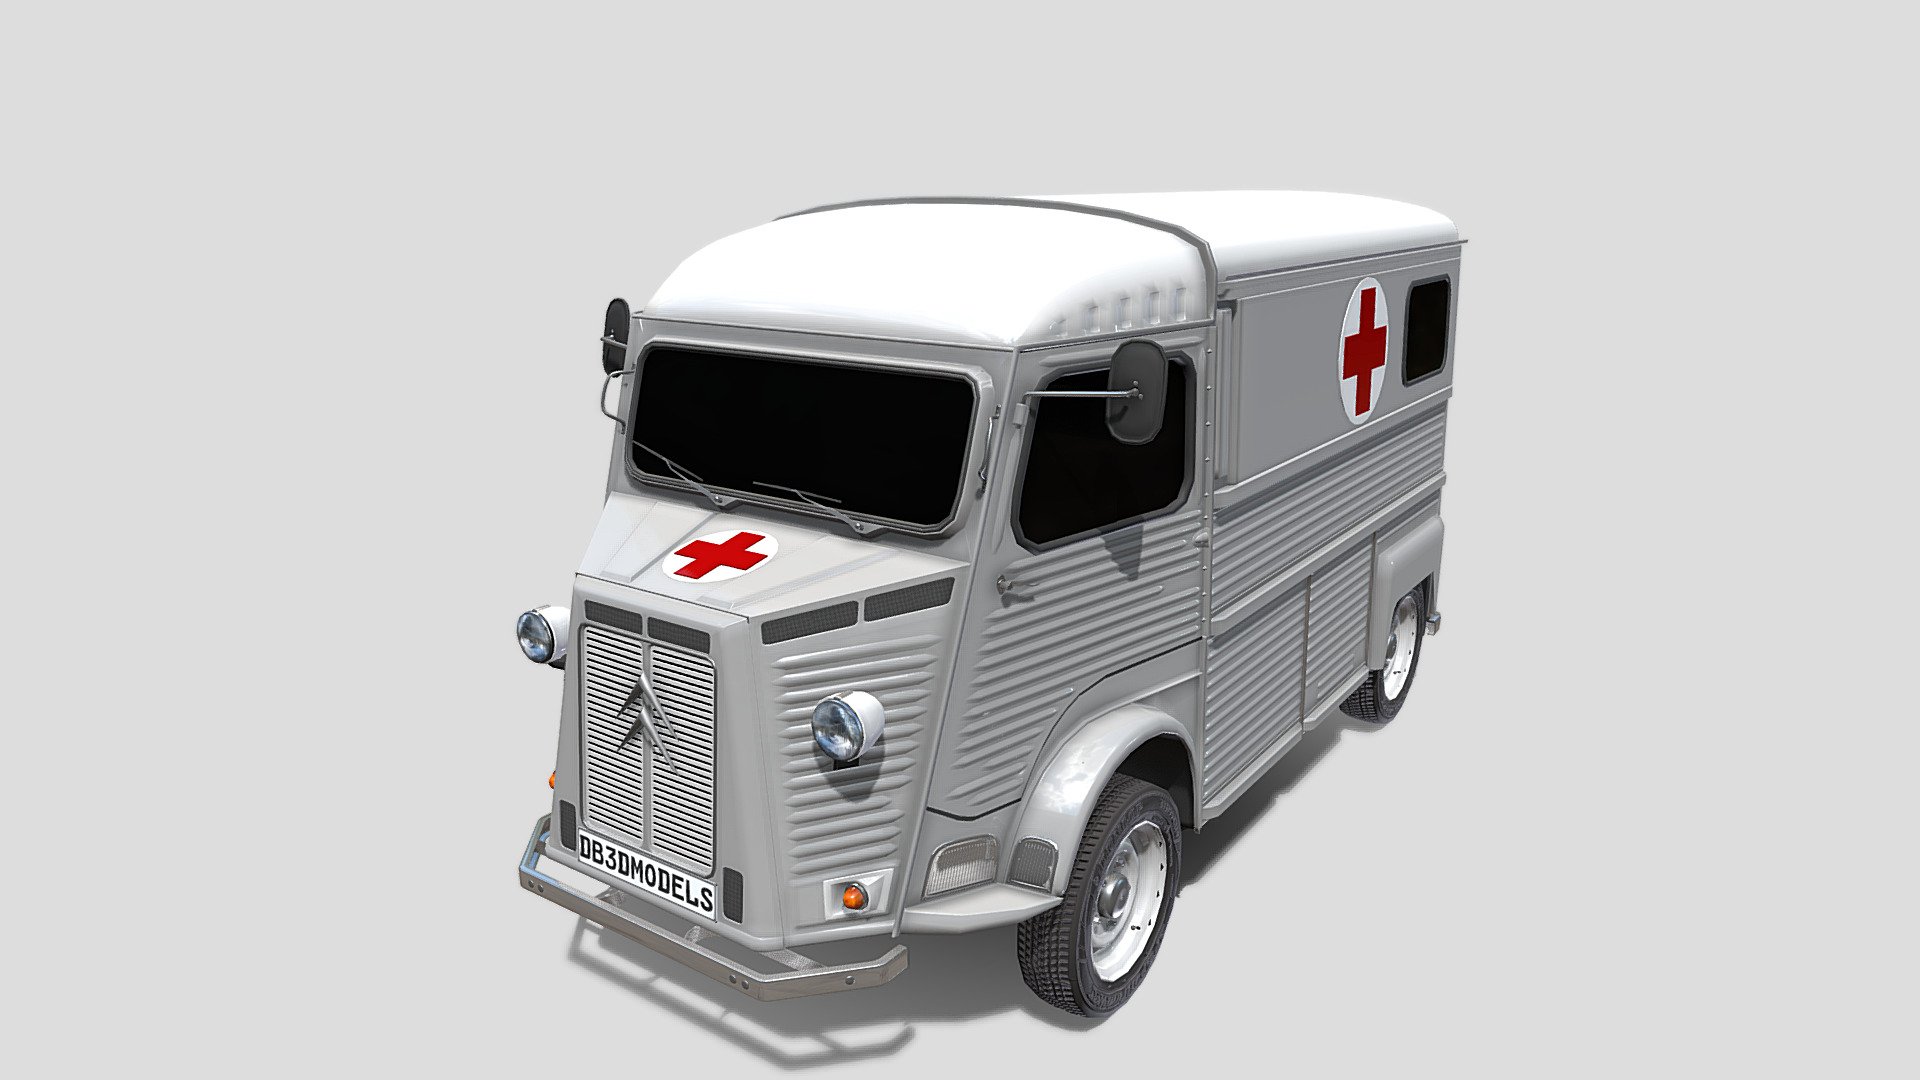 Highly detailed Citroen HY 3D model rendered with Cycles in Blender, as per seen on attached images.

The model is very intricately built, with a simple underbody built as well. 

The 3d model is scaled to original size in Blender.

File formats:

-.blend, rendered with cycles, as seen in the images;

-.obj, with materials applied;

-.dae, with materials applied;

-.fbx, with materials applied;

-.stl;

Files come named appropriately and split by file format.

3D Software:

The 3D model was originally created in Blender 3.1 and rendered with Cycles.

Materials and textures:

The models have materials applied in all formats, and are ready to import and render, note that some minimal adjustments might be needed to look best in the renderer of choice.

The models come with png textures.

Preview scenes:

The preview images are rendered in Blender using its built-in render engine &lsquo;Cycles' 3d model